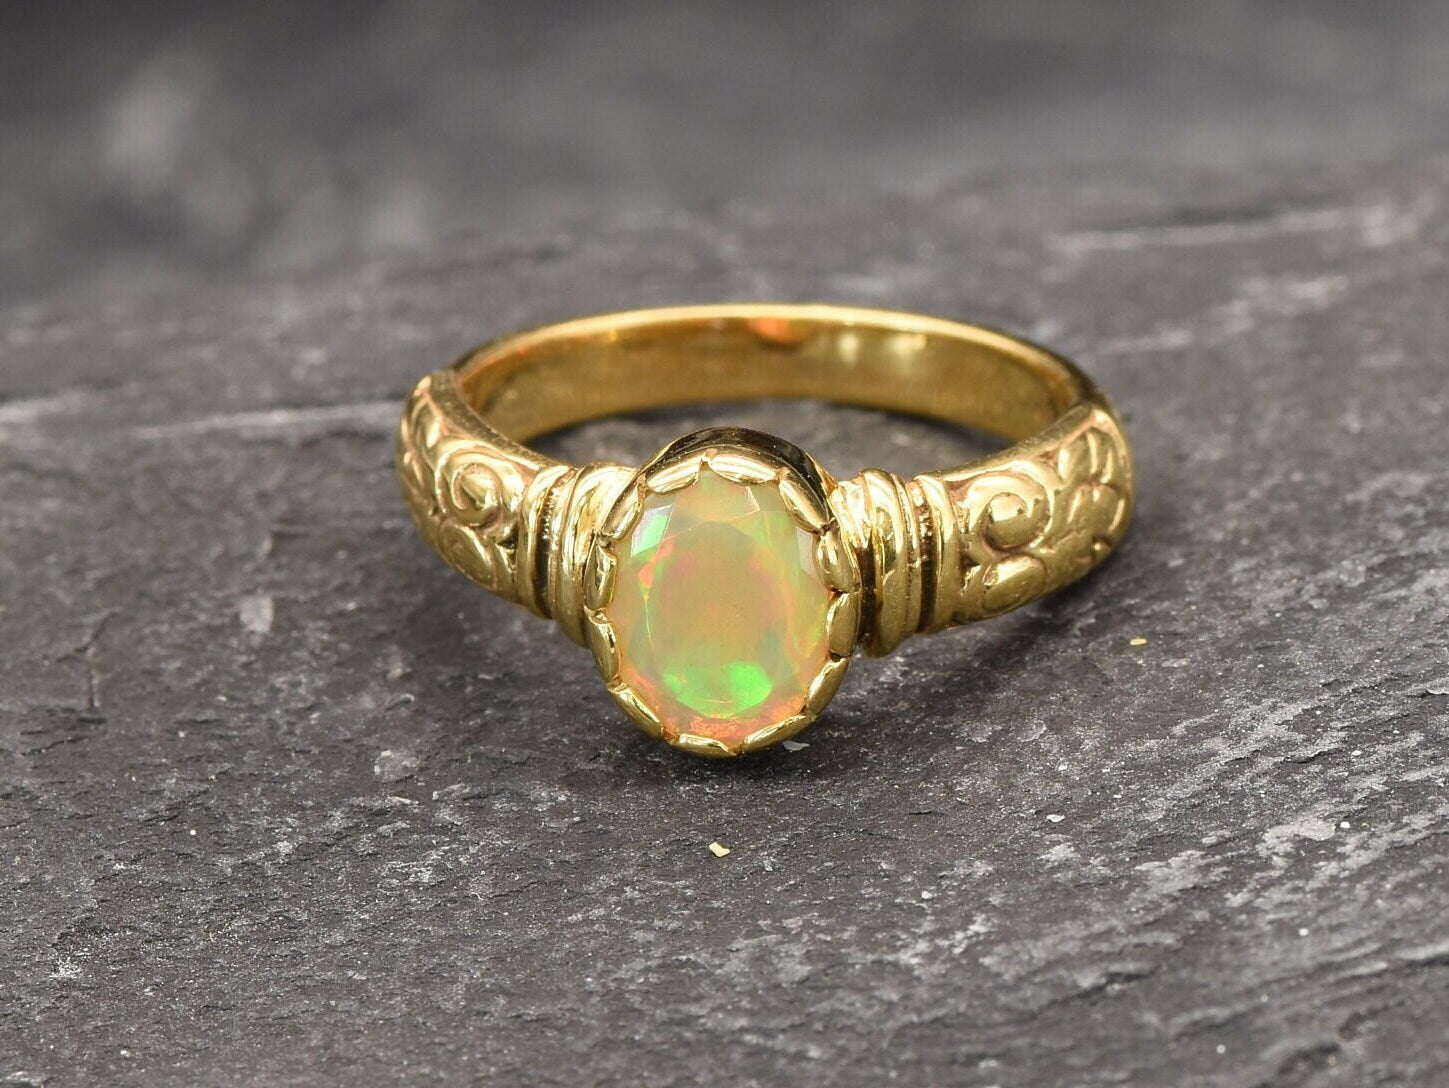 Fire Opal Ring, Natural Fire Opal, Gold Opal Ring, Boho Ring, October Birthstone, Tribal Ring, Bohemian Ring, Wide Band, Gold Vermeil Ring